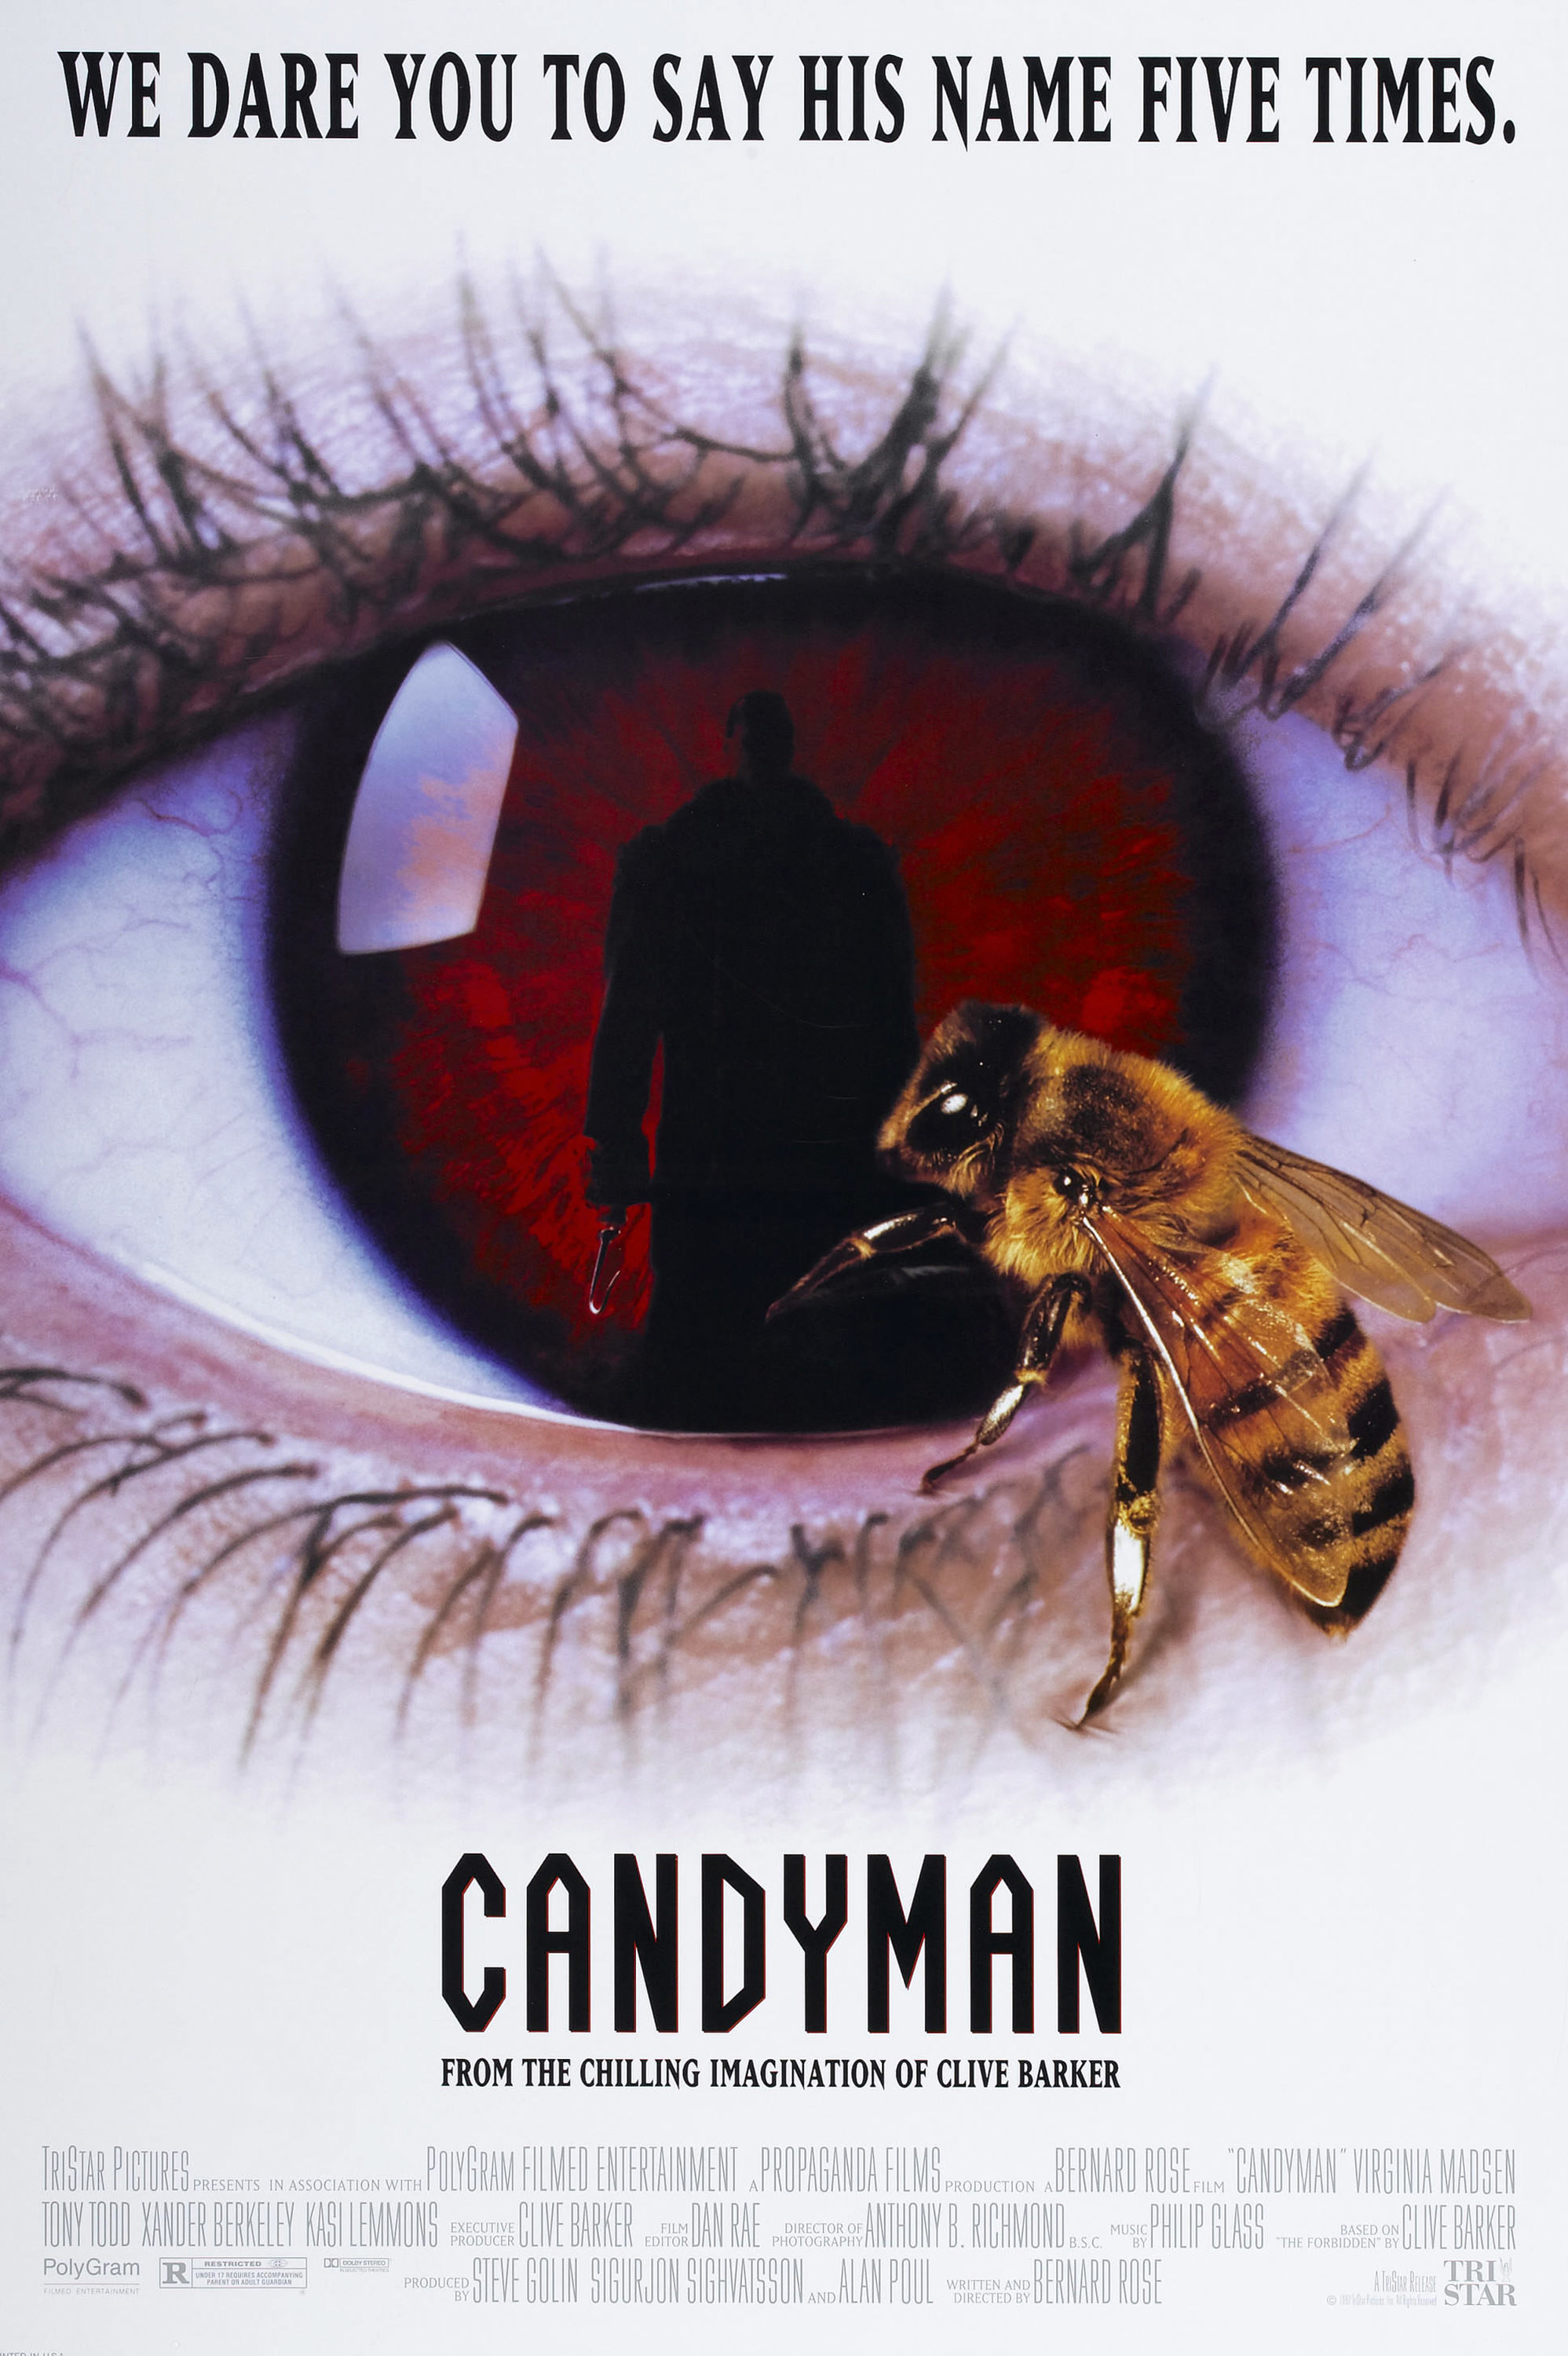 The &quot;Candyman&quot; official poster which features a very large bee near a very large eye, which Candyman&#x27;s silhouette visible in the reflection